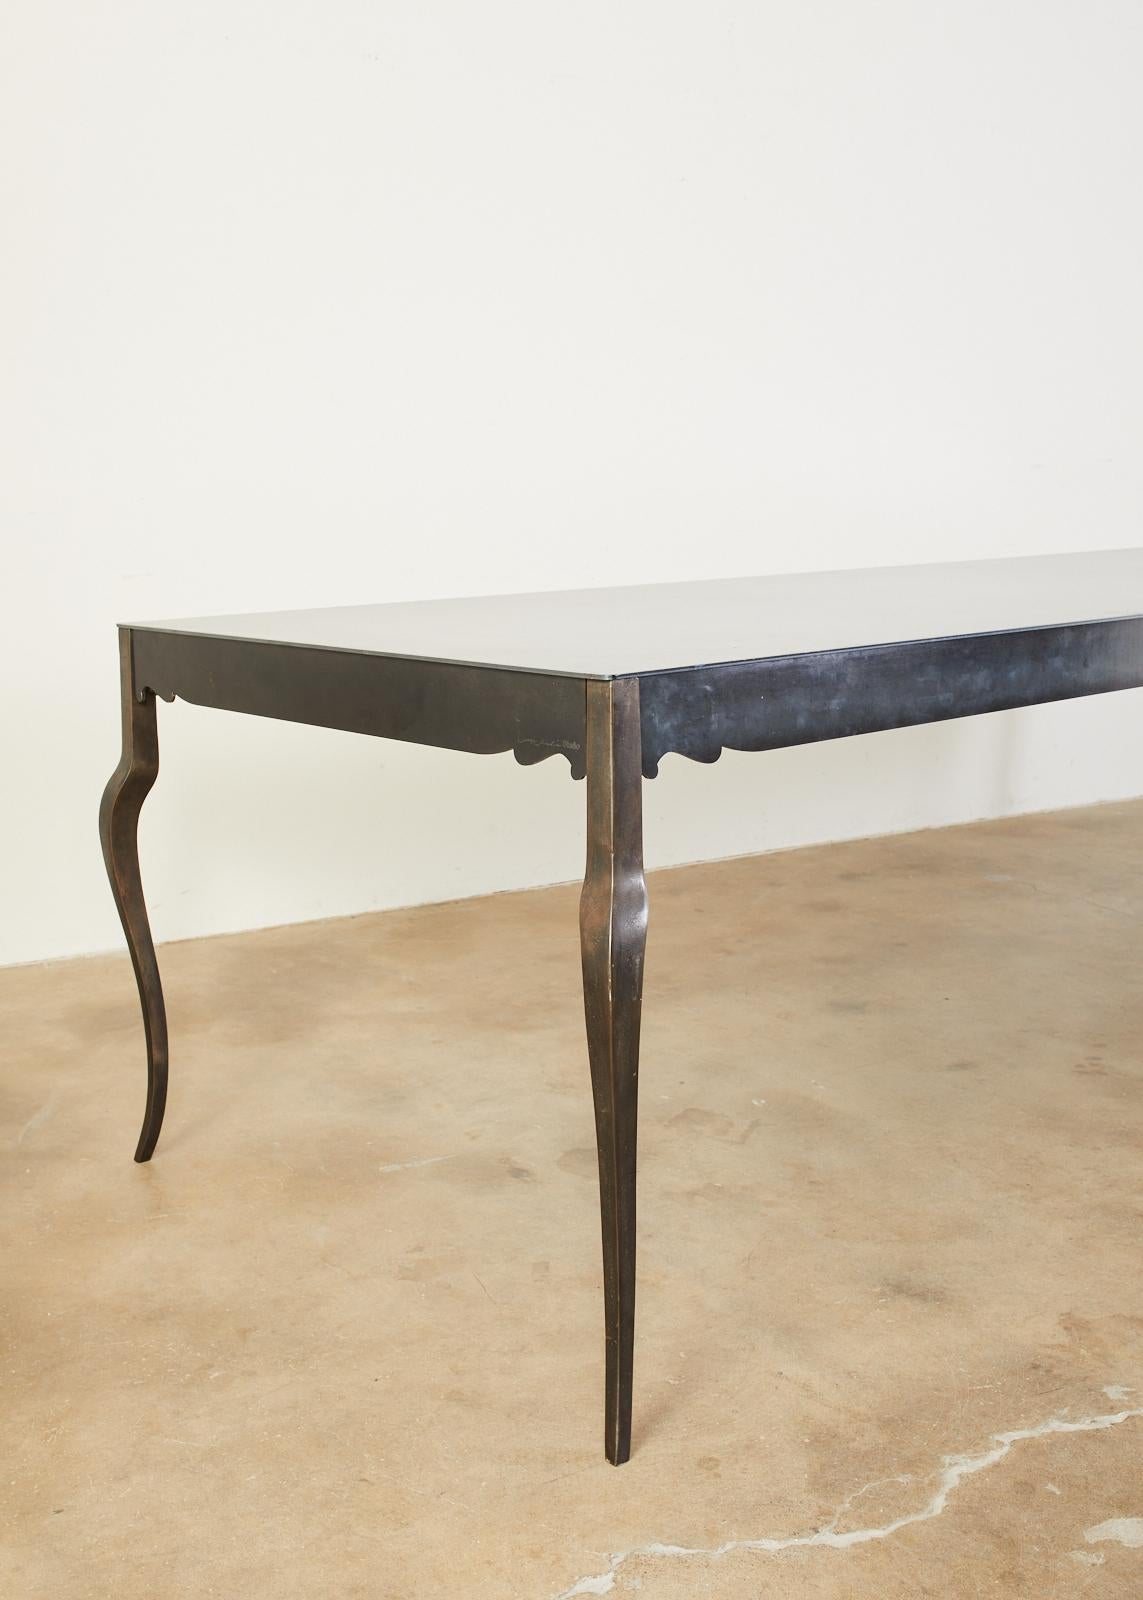 Contemporary Modern Steel Foundry Dining Table by Gregor Jenkin Studio